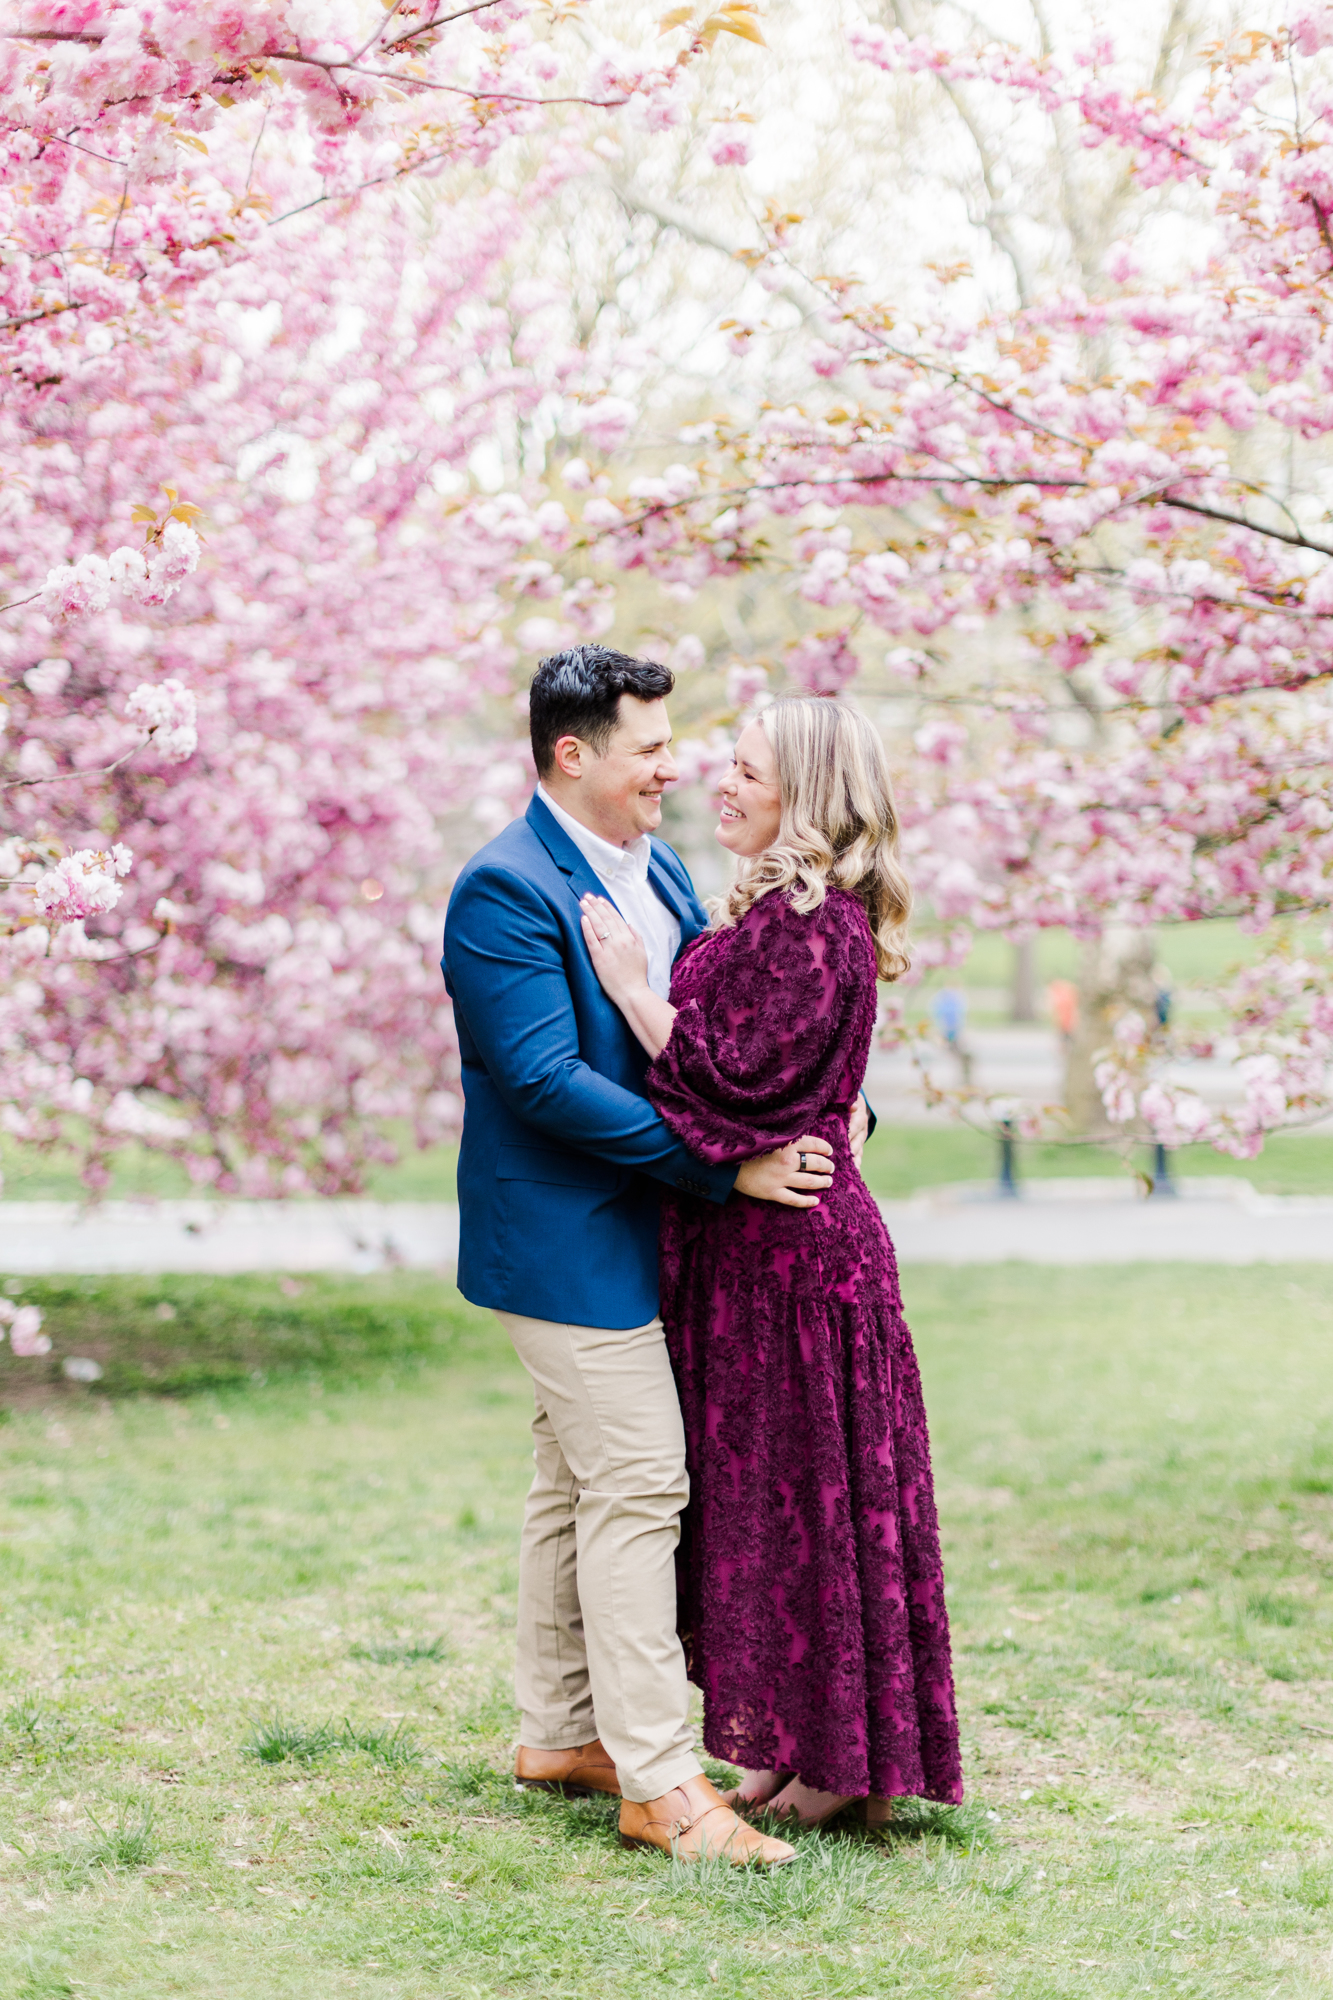 Vibrant Engagement Pictures in Central Park